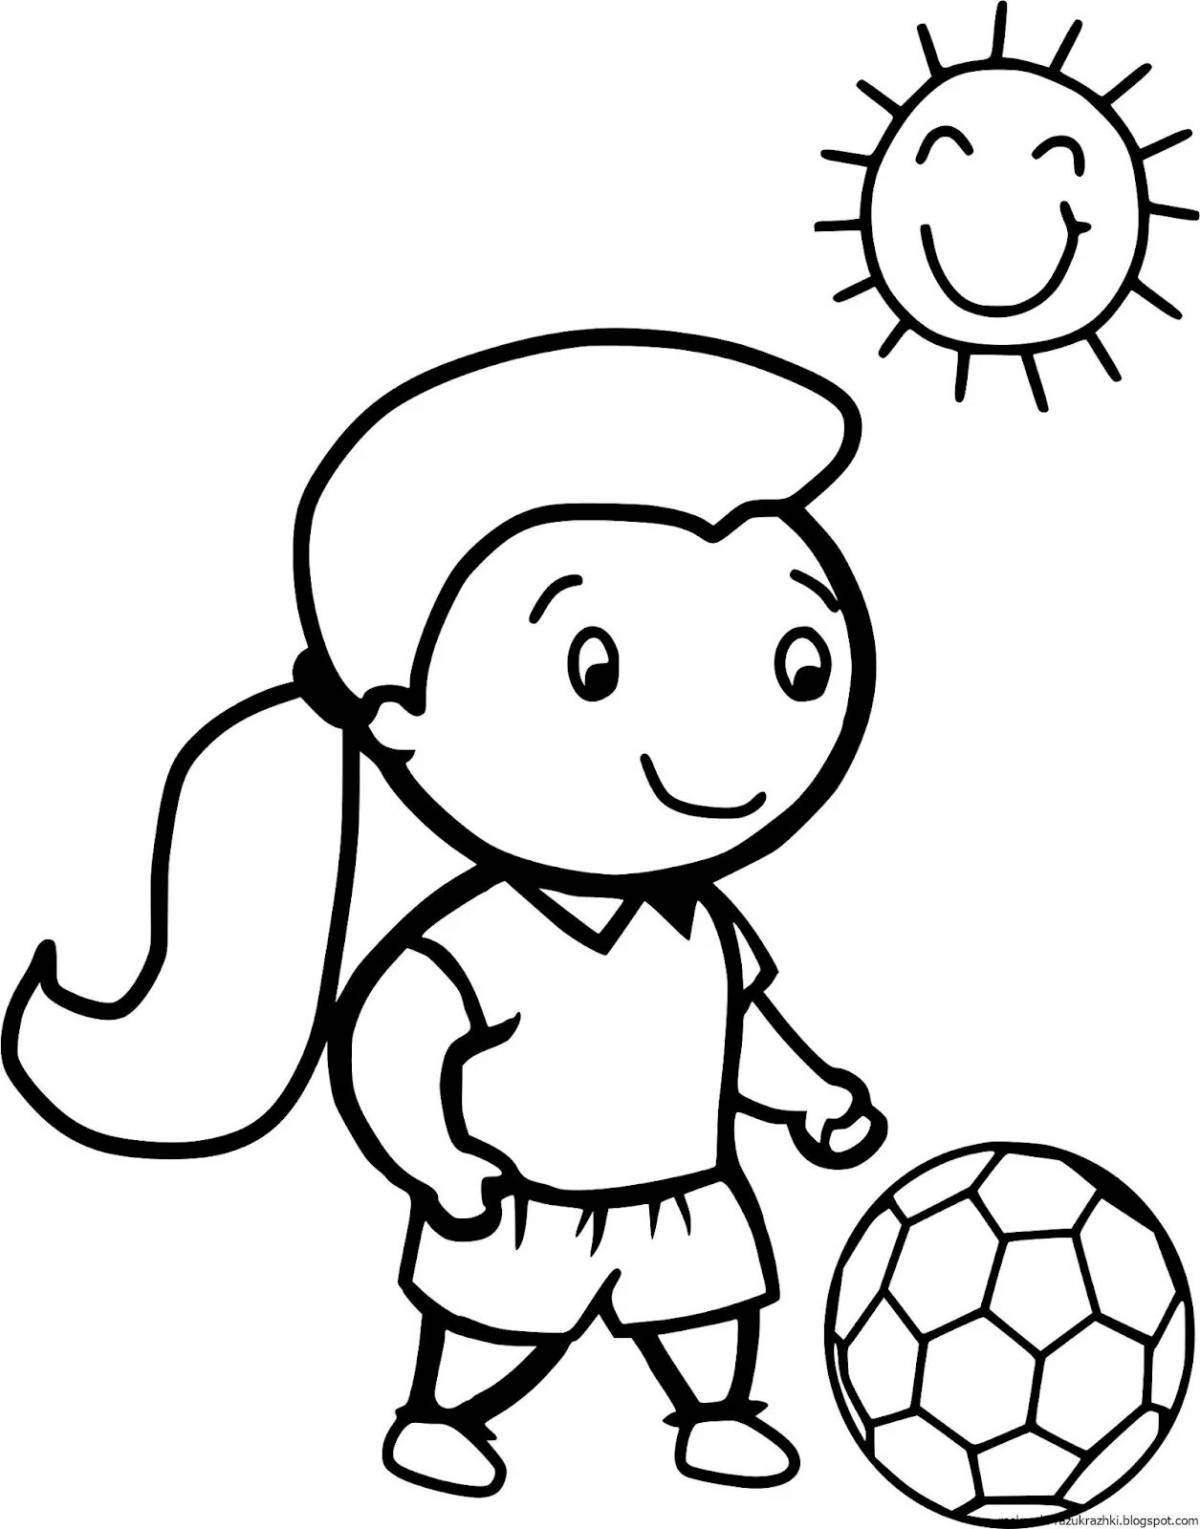 Joyful coloring book health and sports